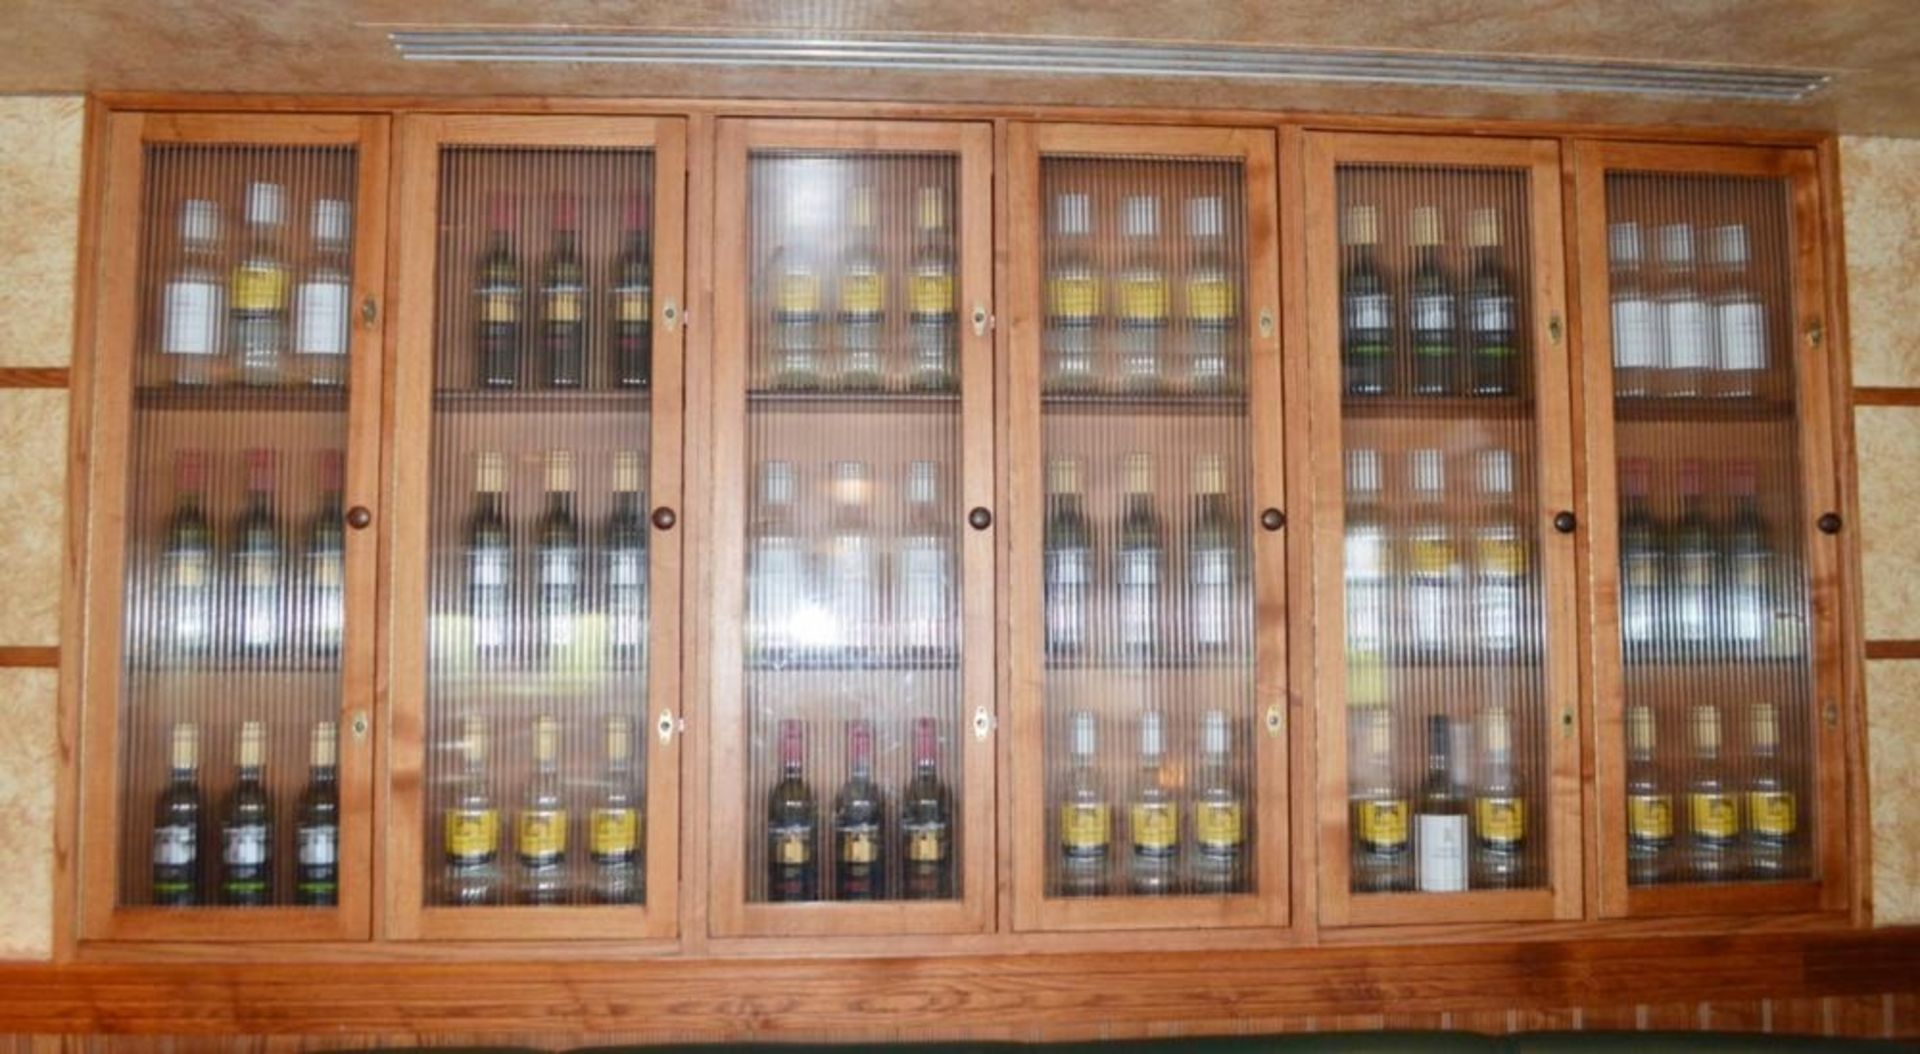 1 x Wooden Wine Bottle Cabinet With Ribbed Glass Doors - W264cm x H104cm - CL357 - Location: Bolton